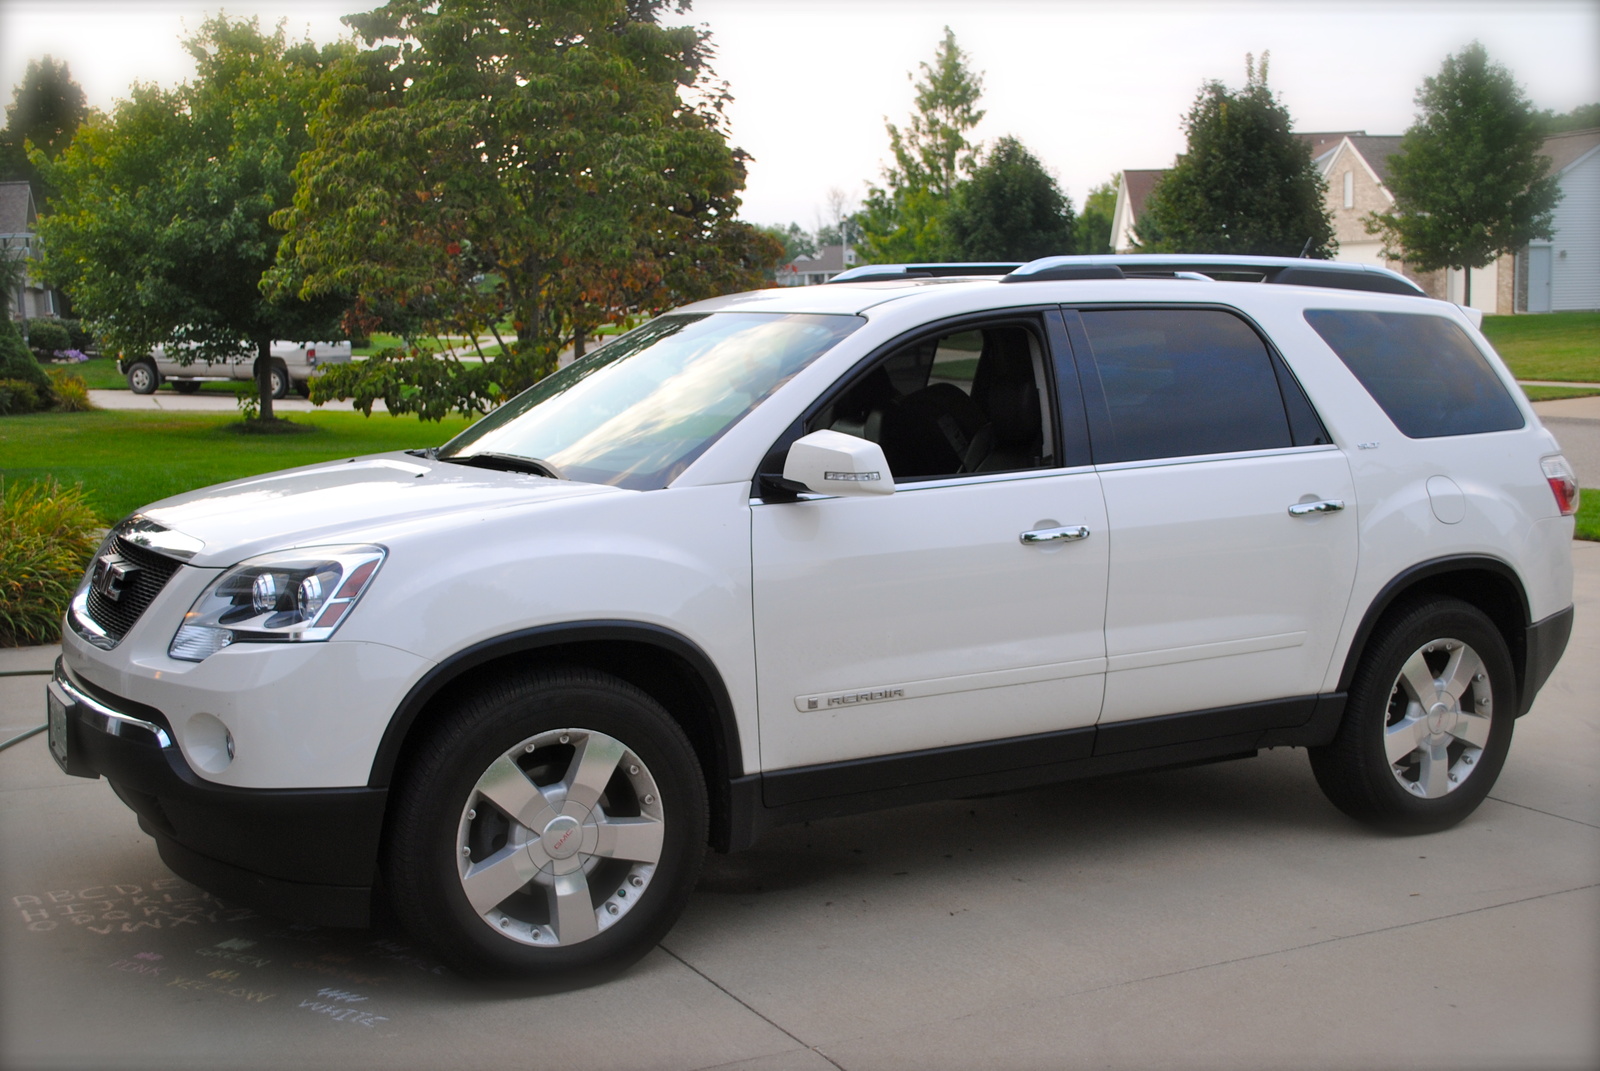 Search for new 2007 gmc acadia #5